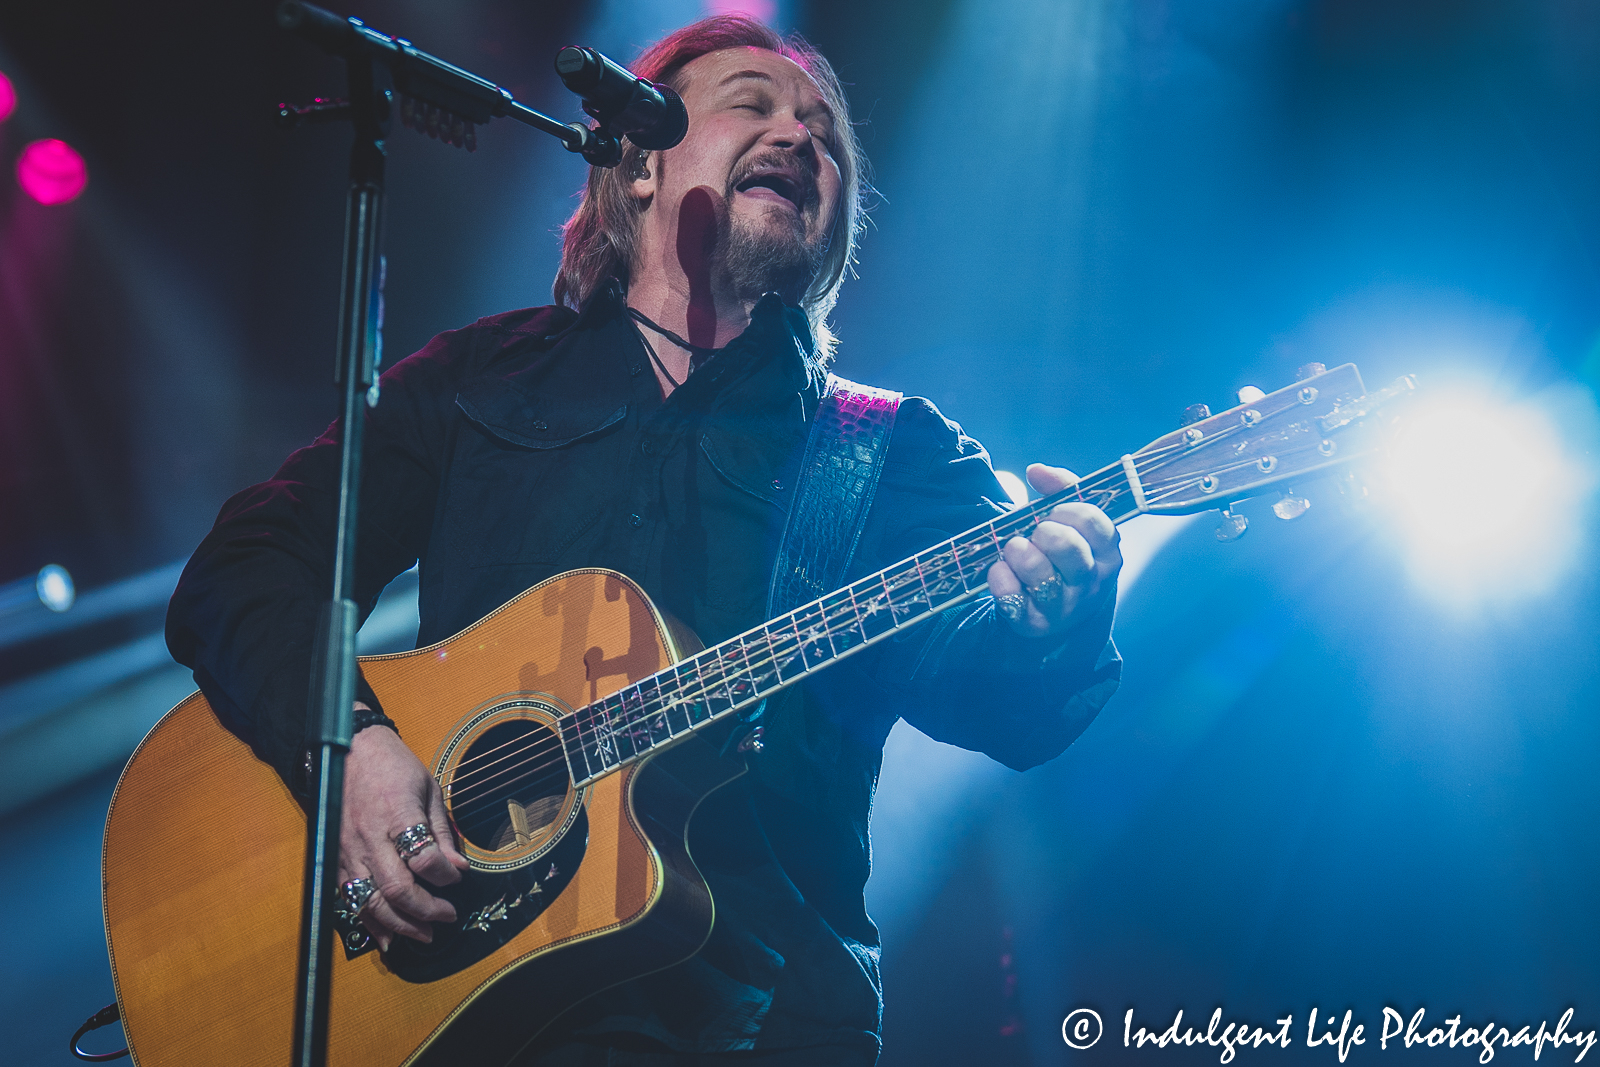 Playing the acoustic guitar an singing the hit song "I'm Gonna Be Somebody" is Travis Tritt at Ameristar Casino's Star Pavilion in Kansas City, MO on December 3, 2021.